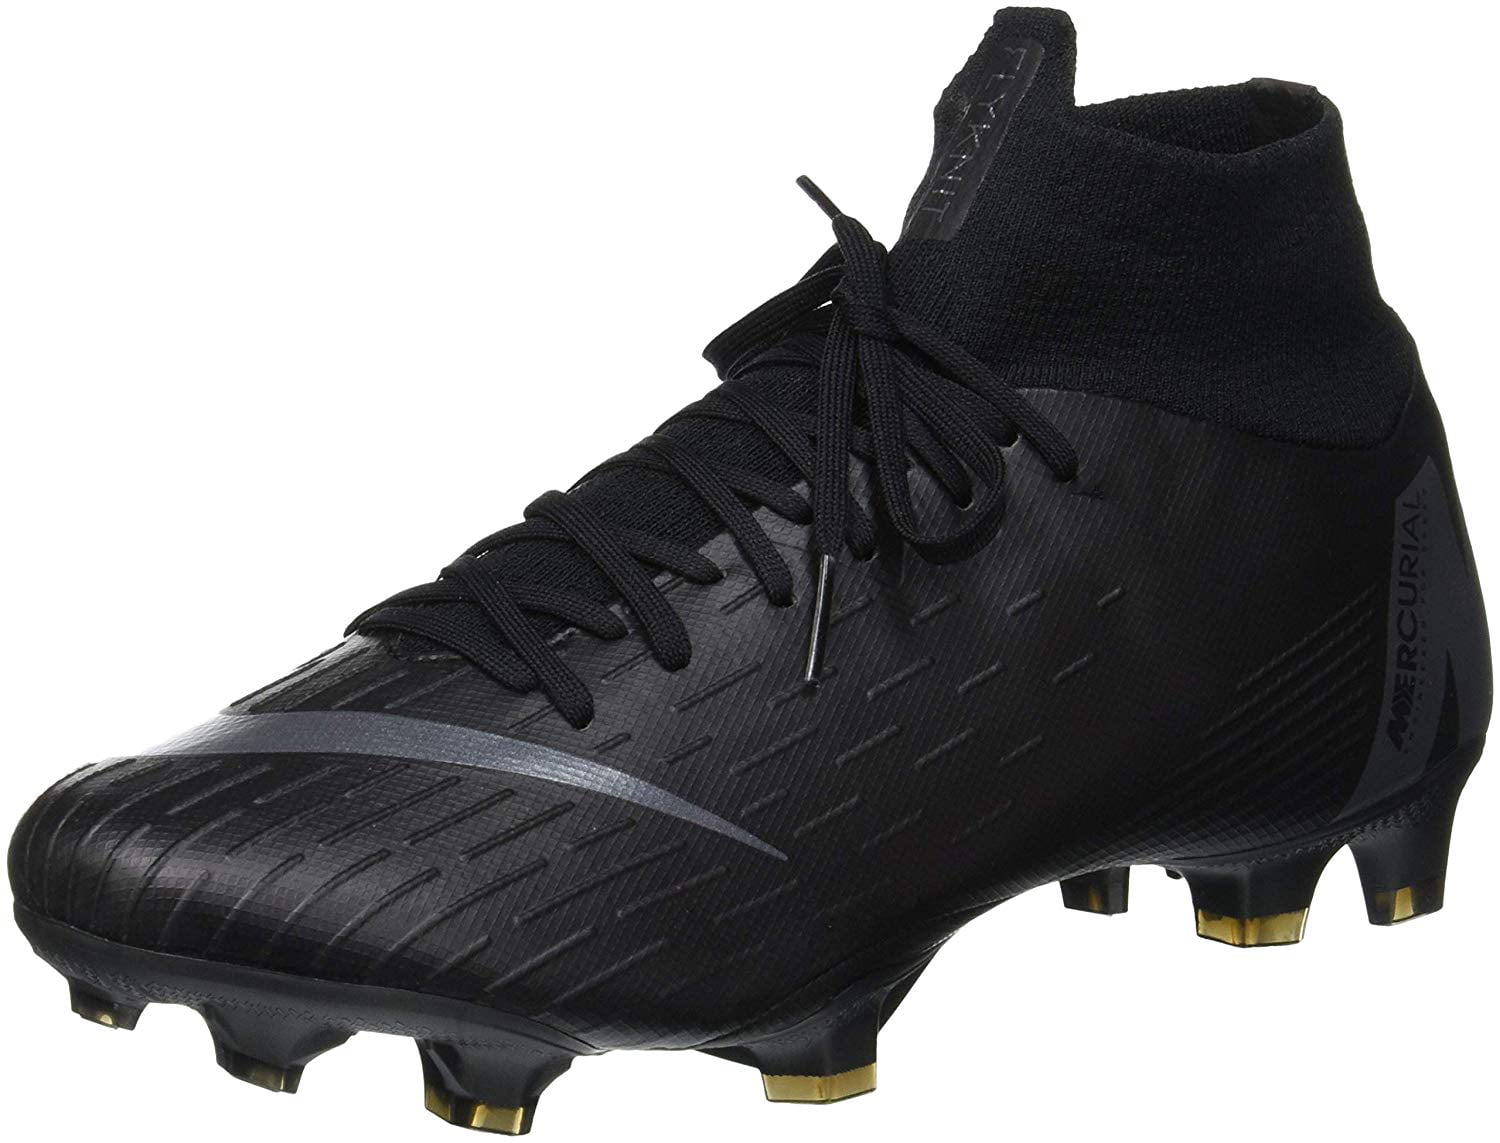 soccer cleats 1.5